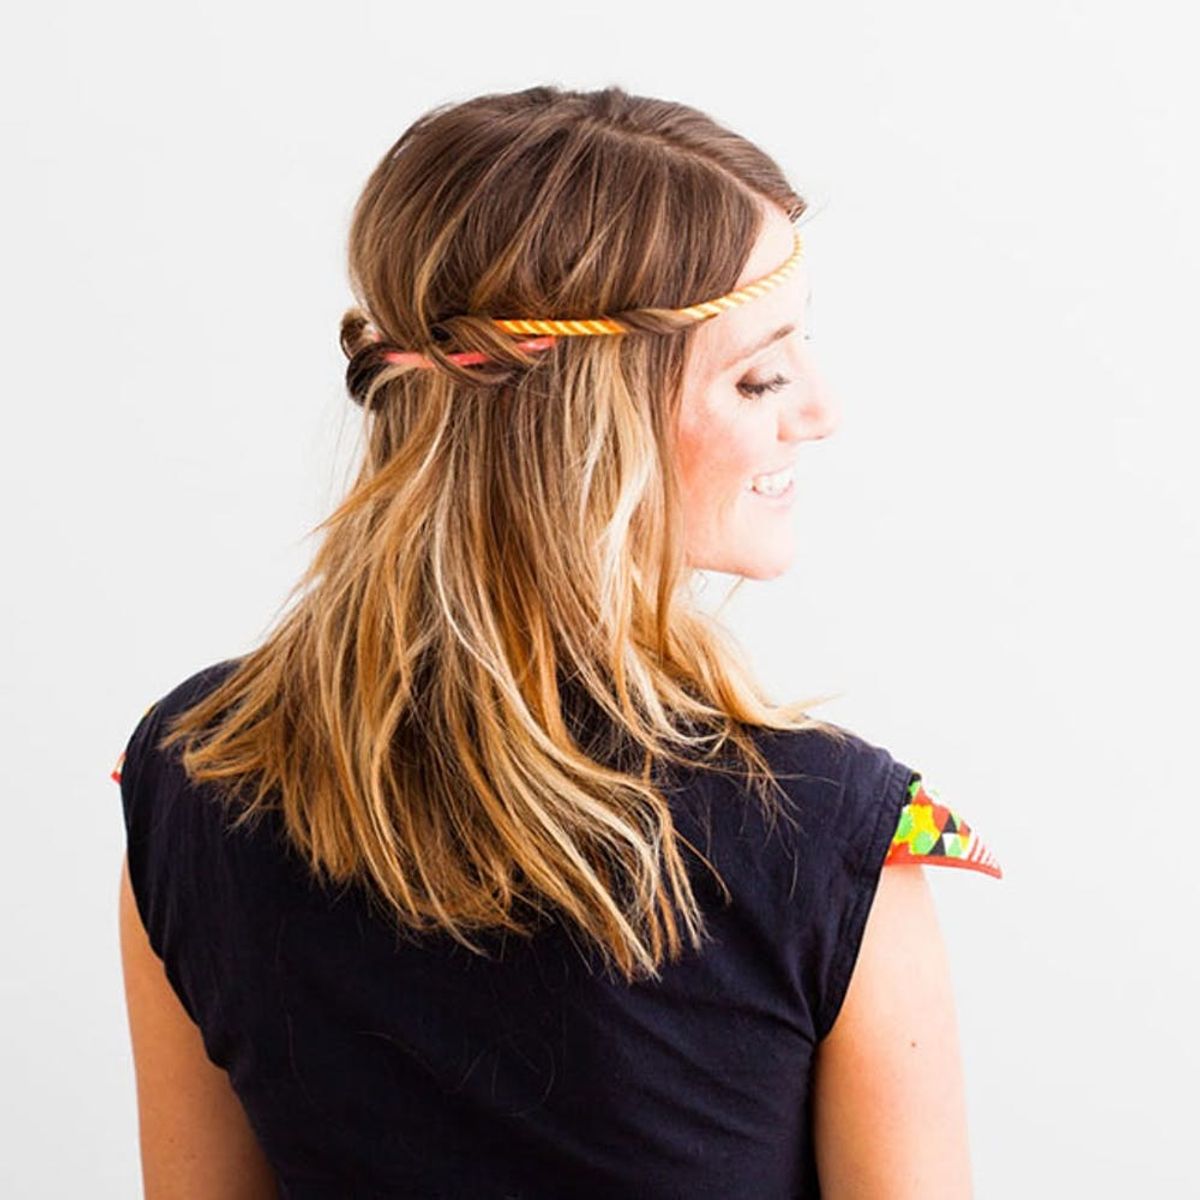 You Won’t Believe What Household Item Is Saving Hairstyles Everywhere